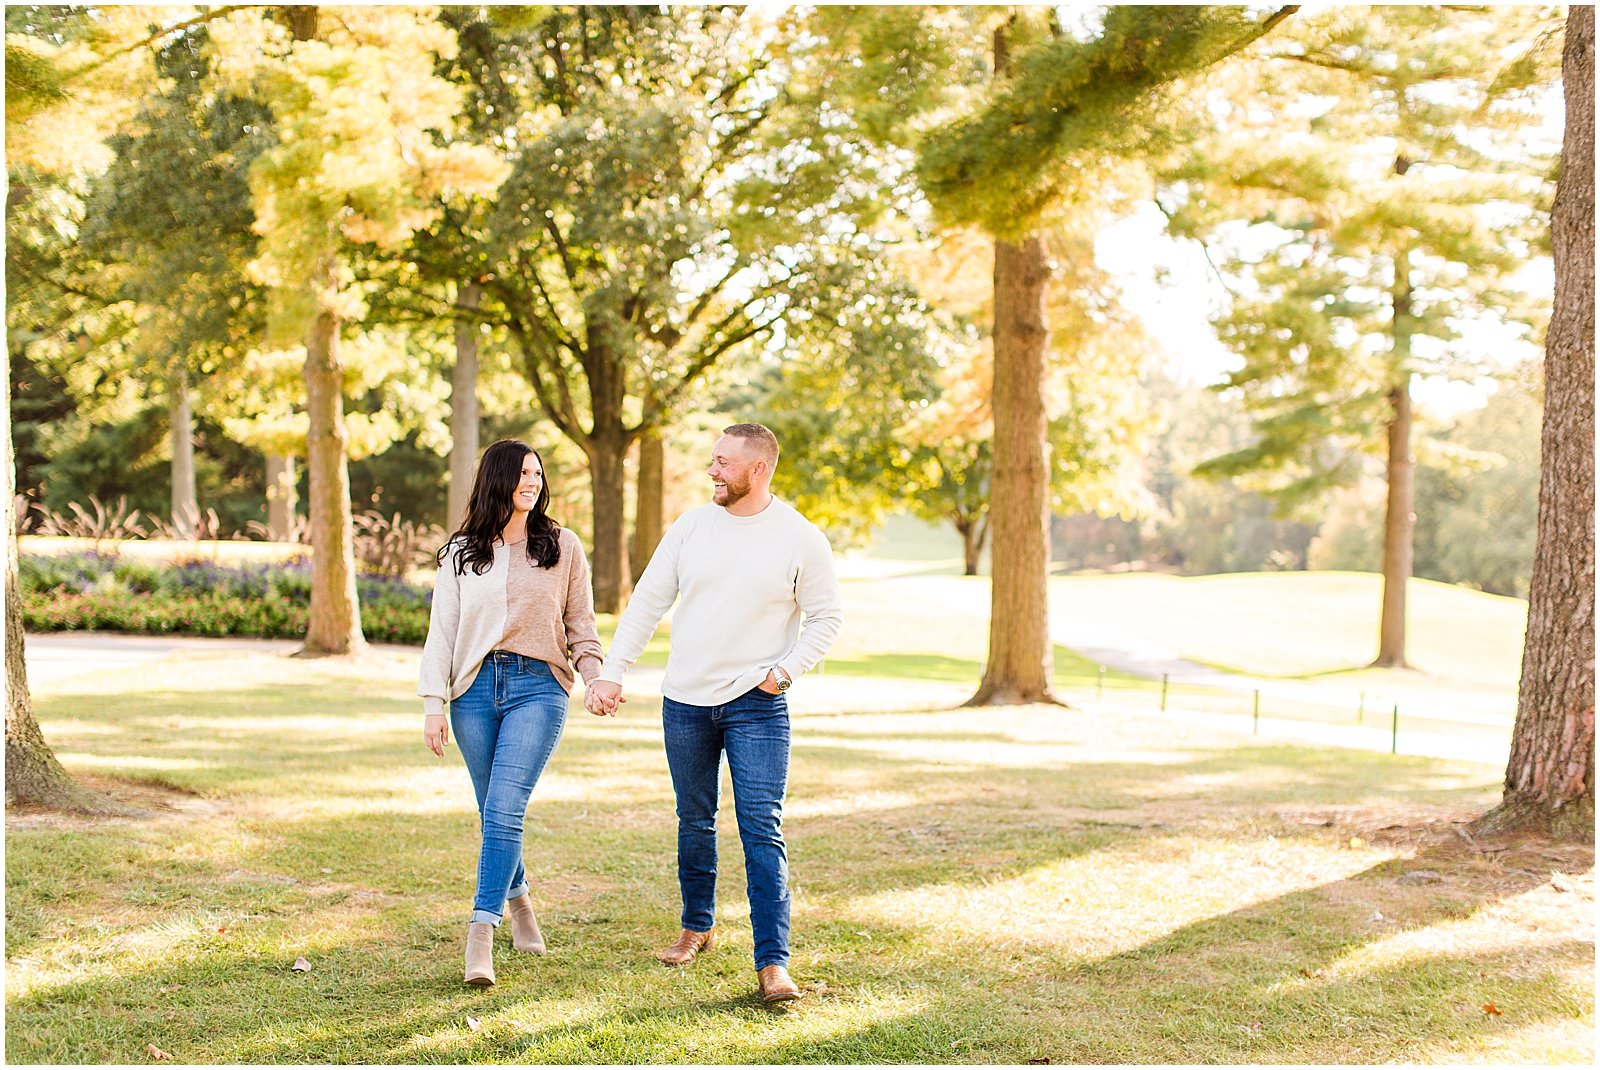 A Rolling Hills Country Club Engagement Session | Meagan and Kyle | Bret and Brandie Photography 0011.jpg